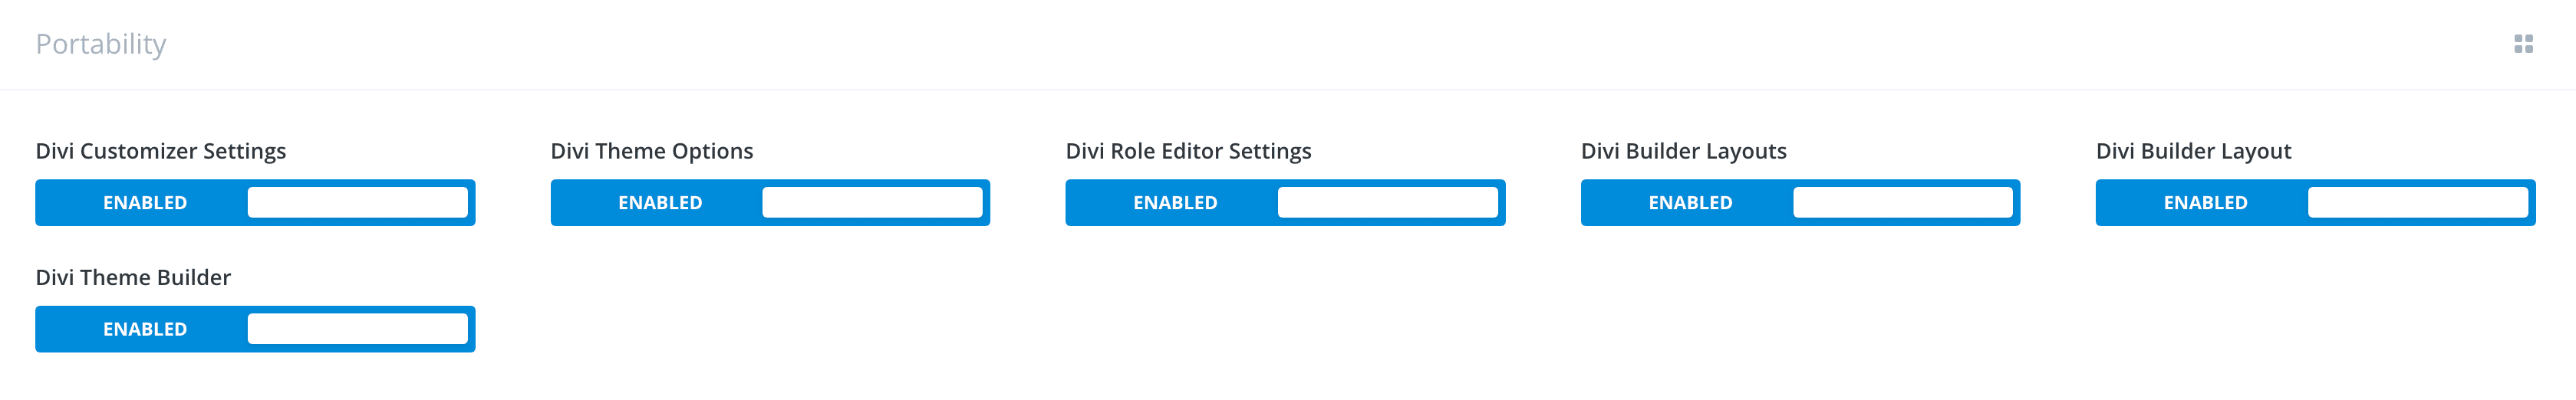 How to use the Divi Role Editor